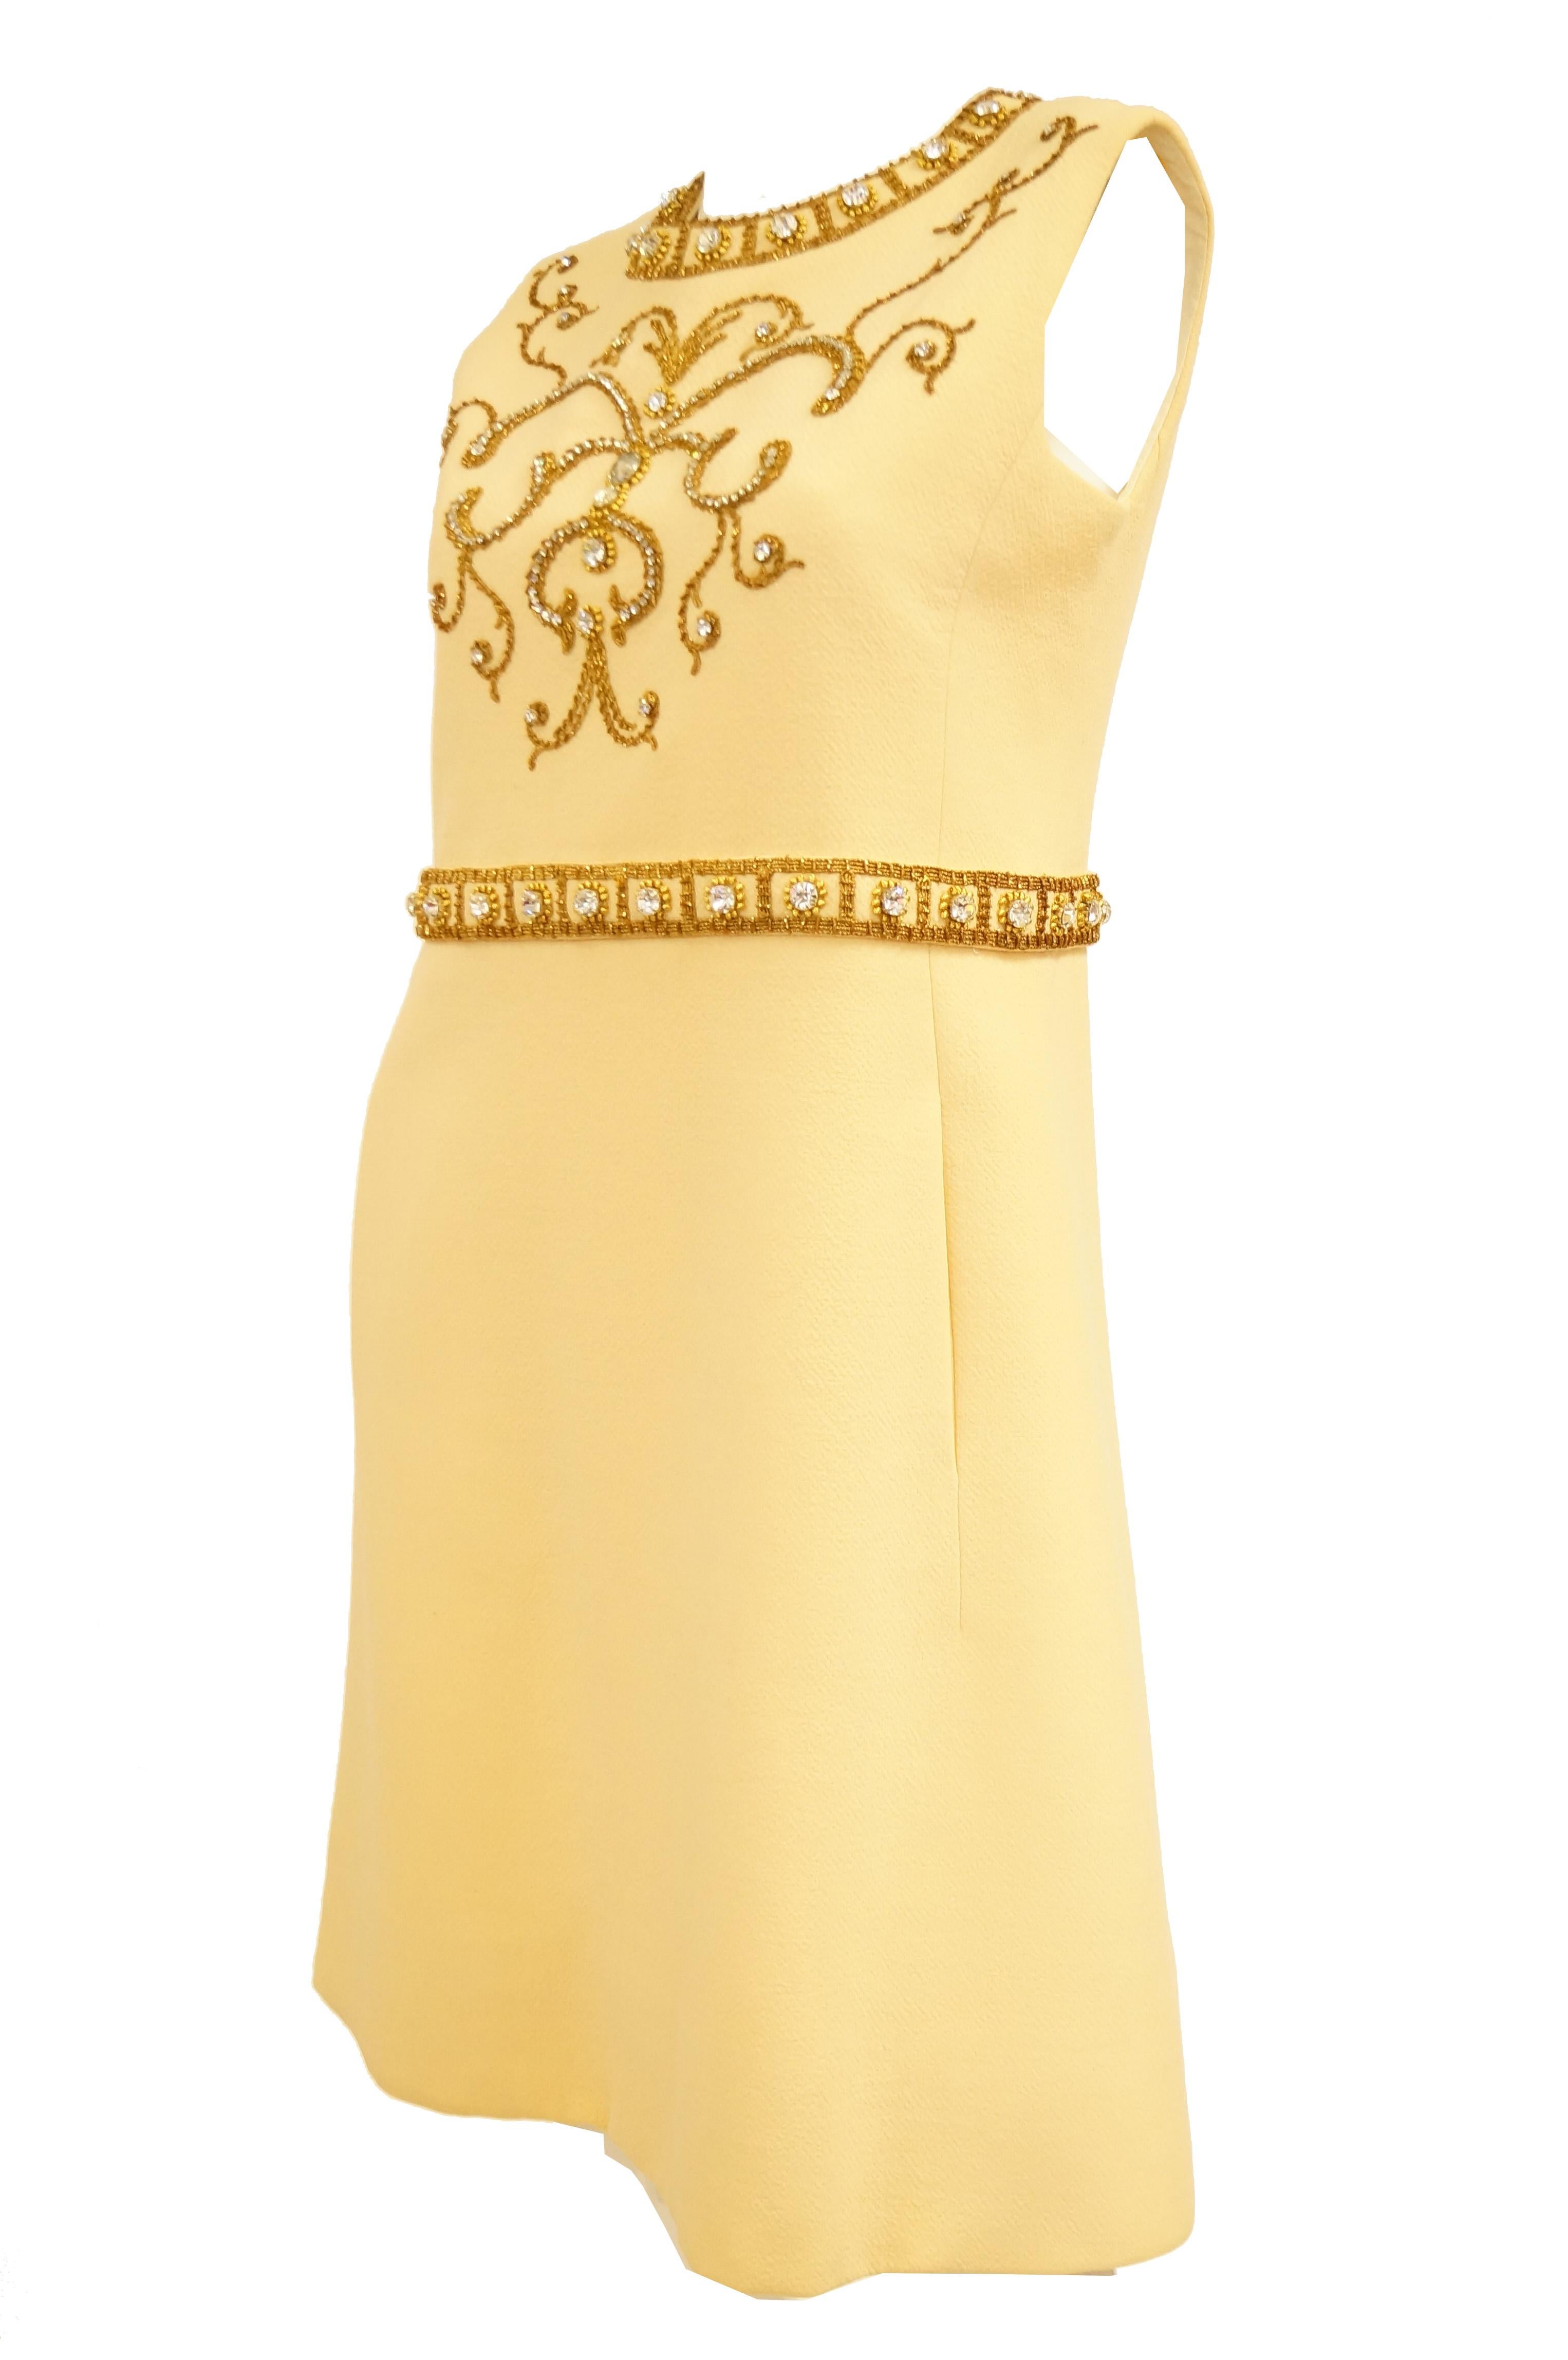 1960s Couture Cardinali Mod Shift Dress W/ Rhinestones & Gold Passementerie In Excellent Condition For Sale In Houston, TX